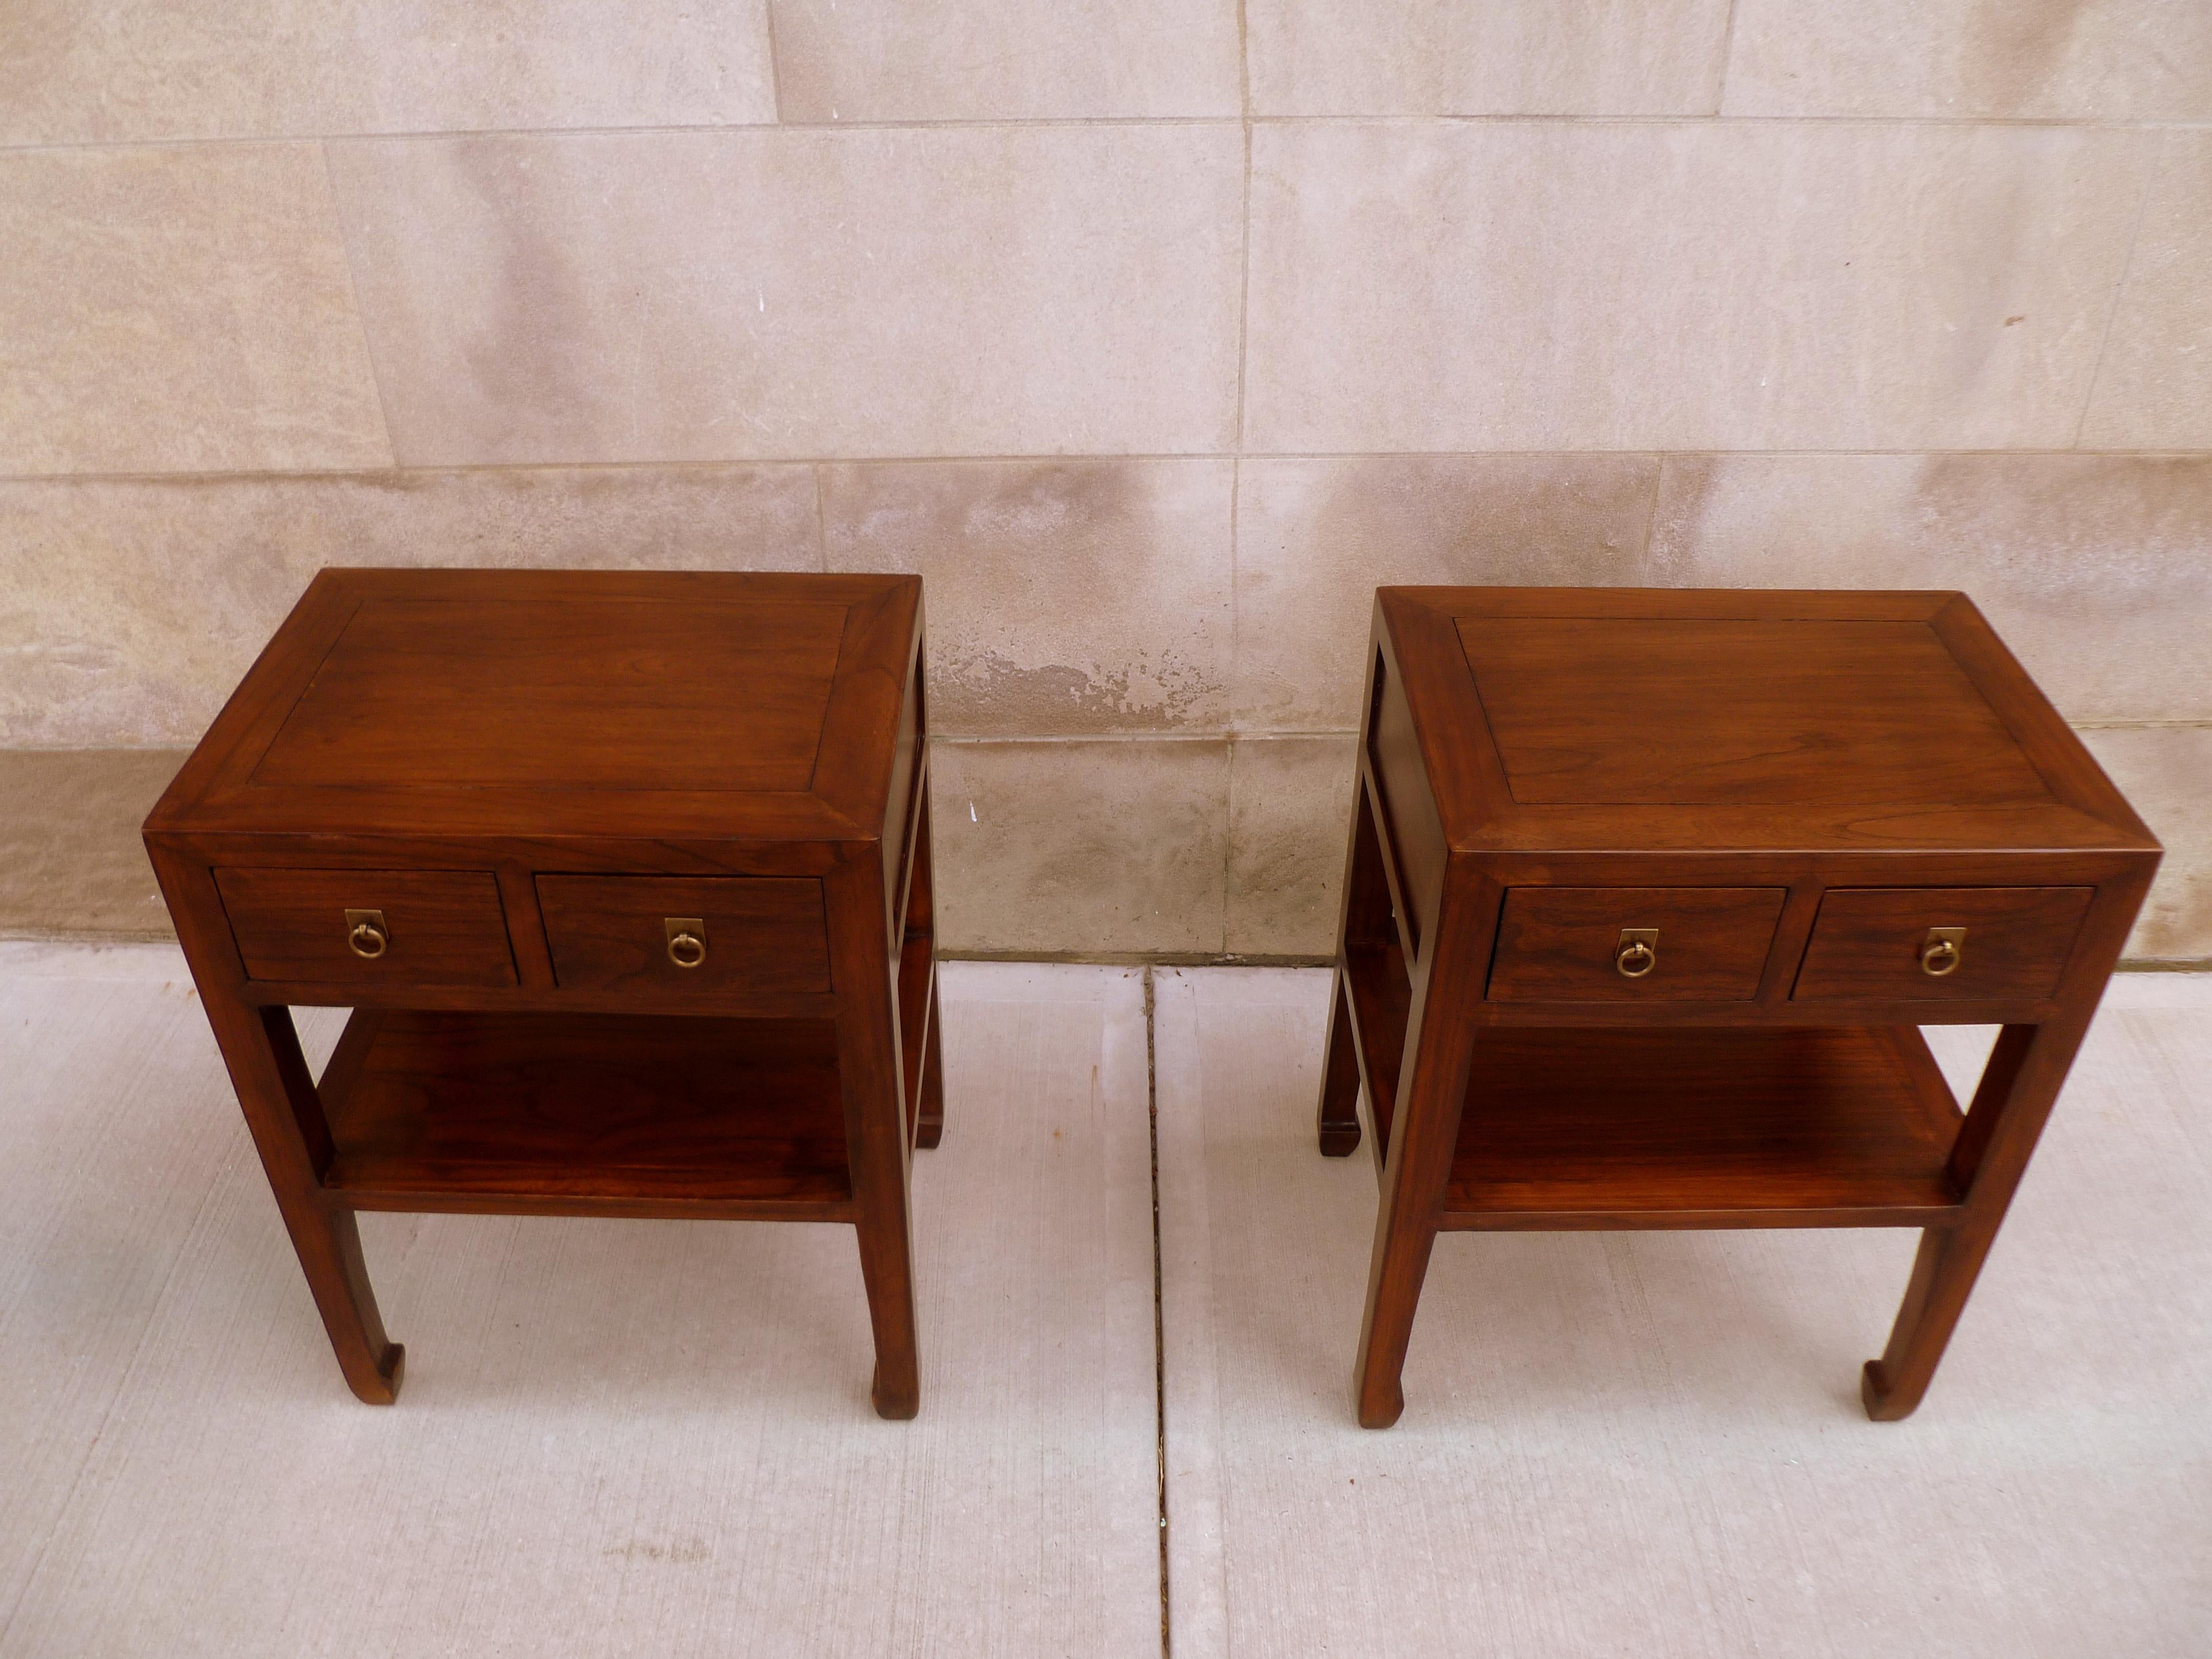 20th Century Pair of Fine Jumu End Tables with Drawers